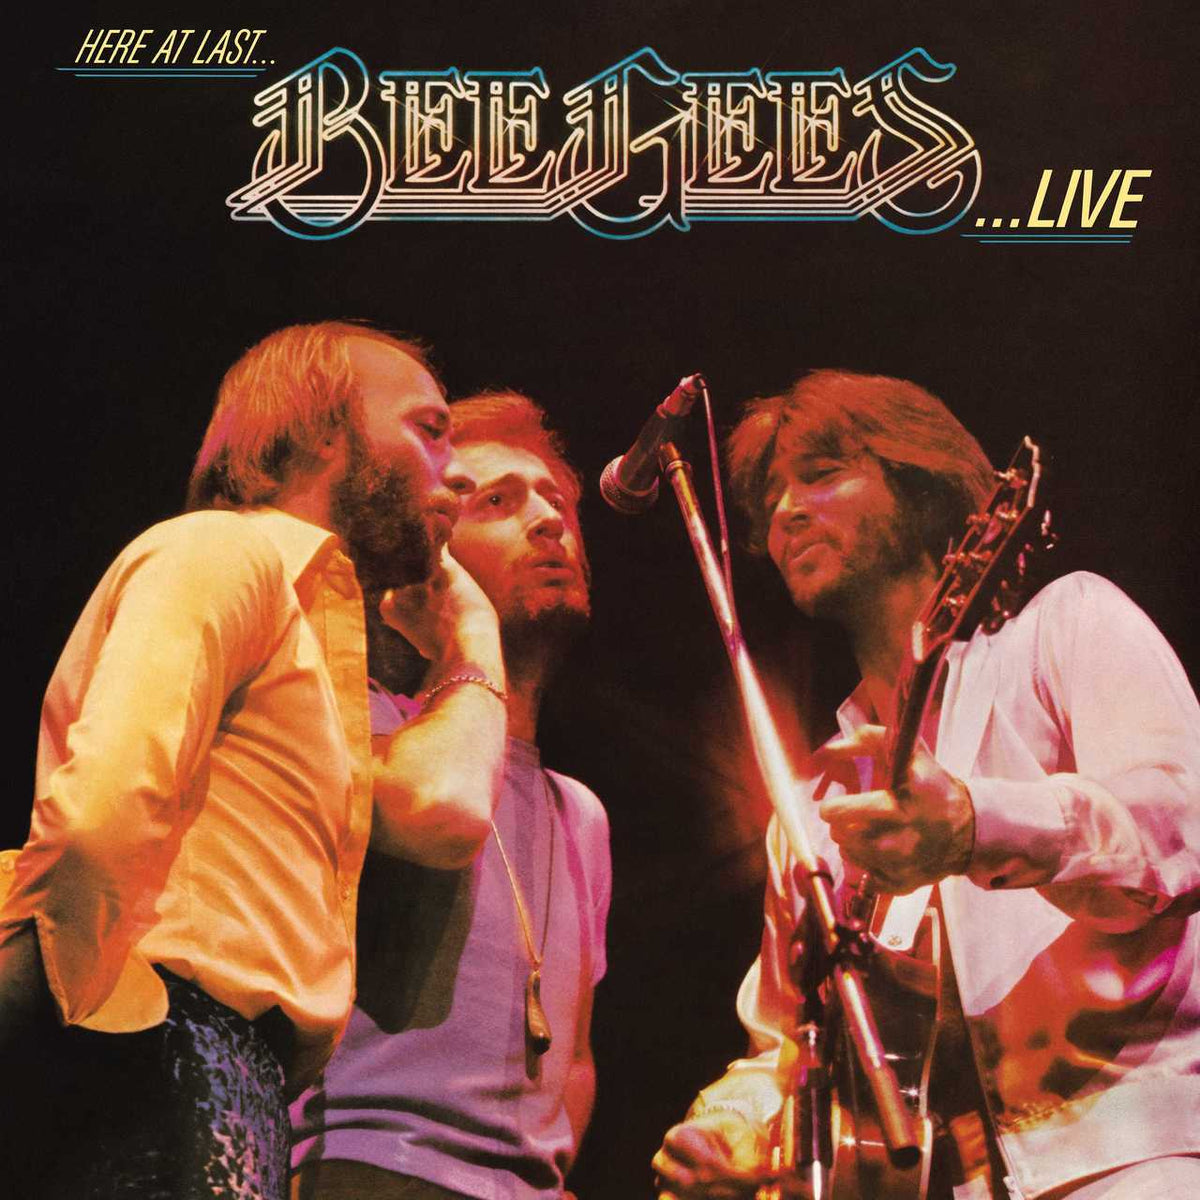 Bee Gees - Here at Last... Live